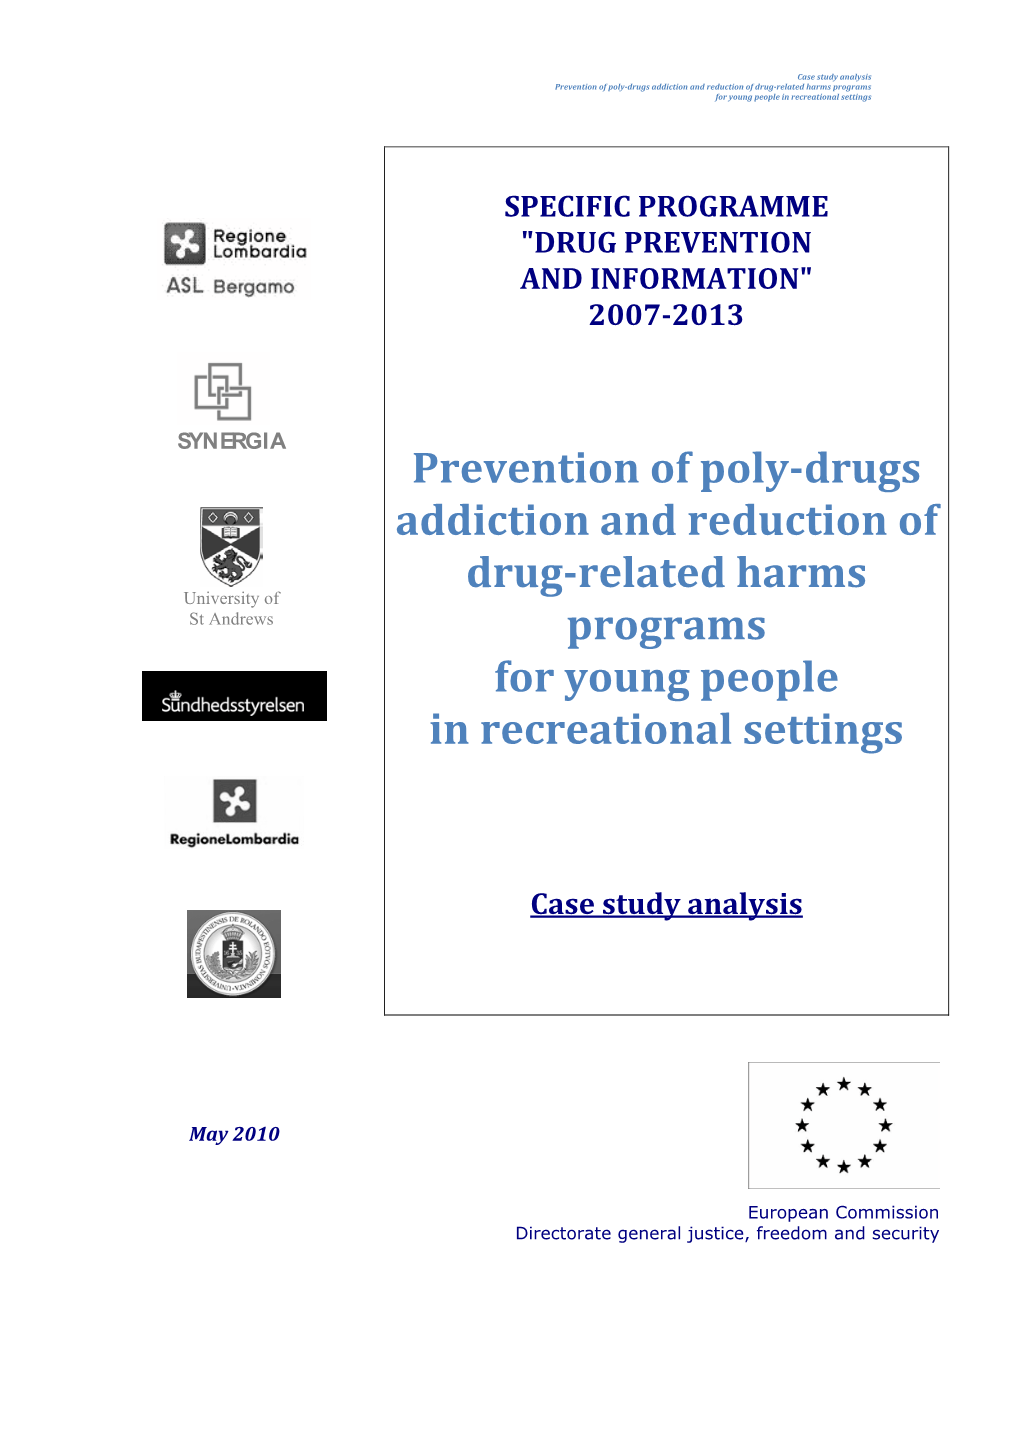 Prevention of Poly-Drugs Addiction and Reduction of Drug-Related Harms Programs for Young People in Recreational Settings